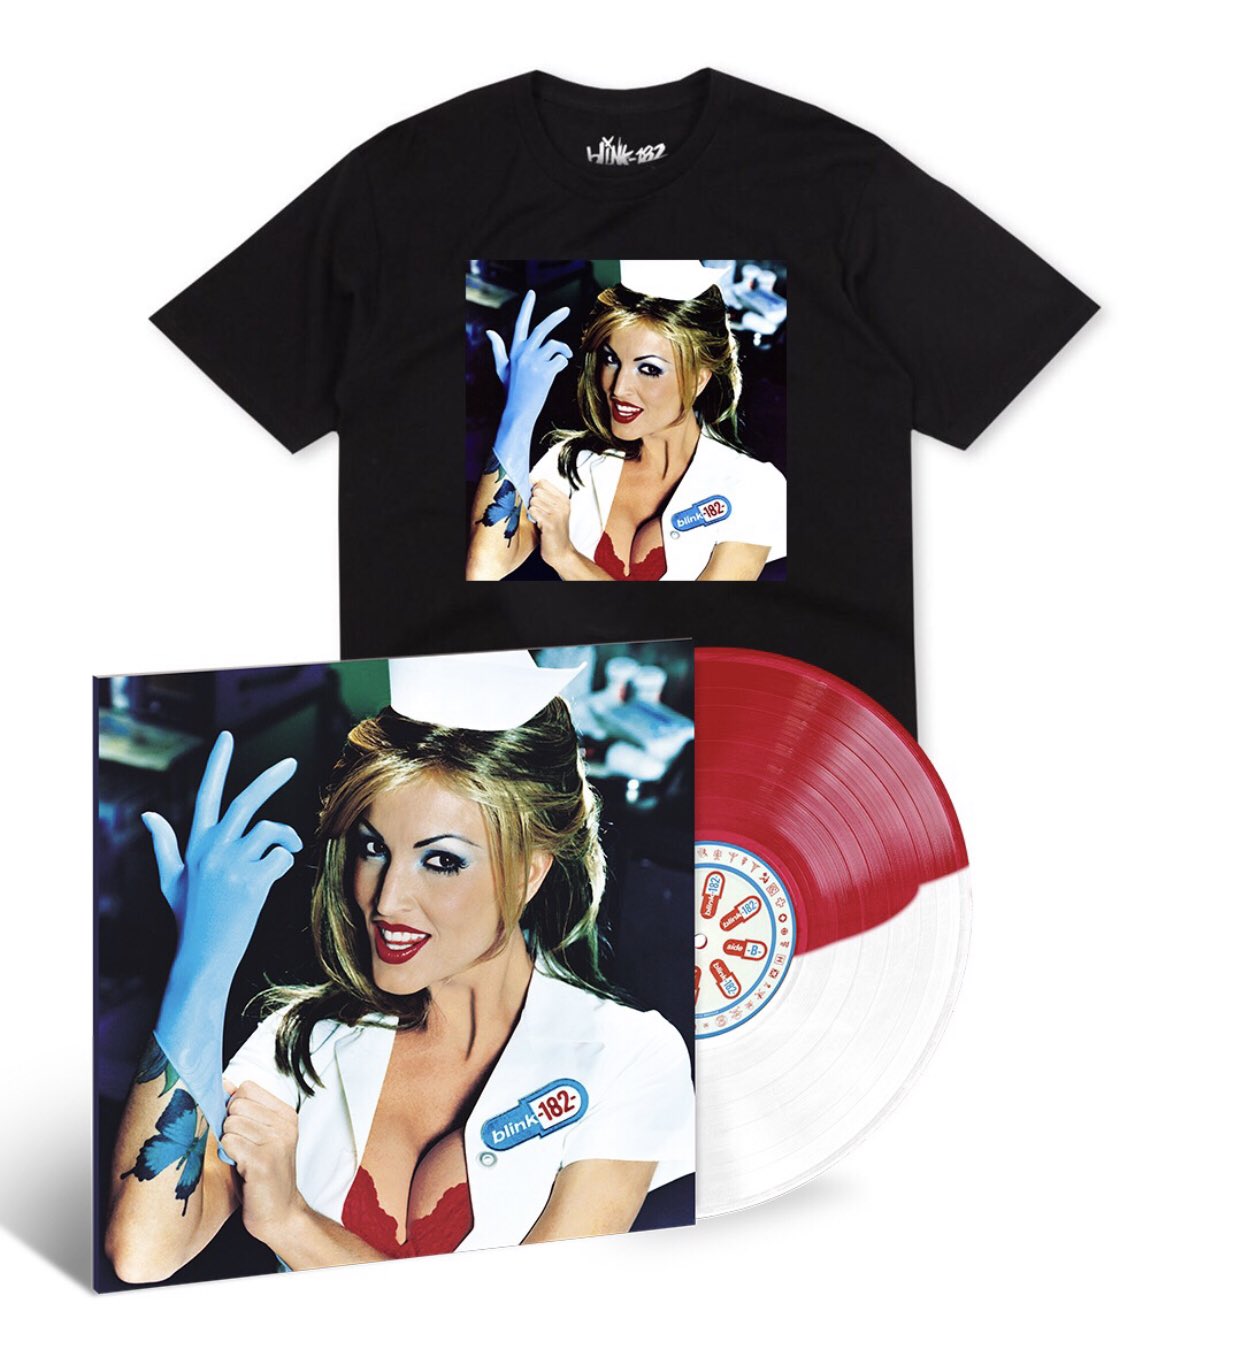 blink-182 on "Enema Of The State limited edition Vinyl and available now while supplies last. https://t.co/W90FlLfX9H https://t.co/nSFMT3zRcn" /